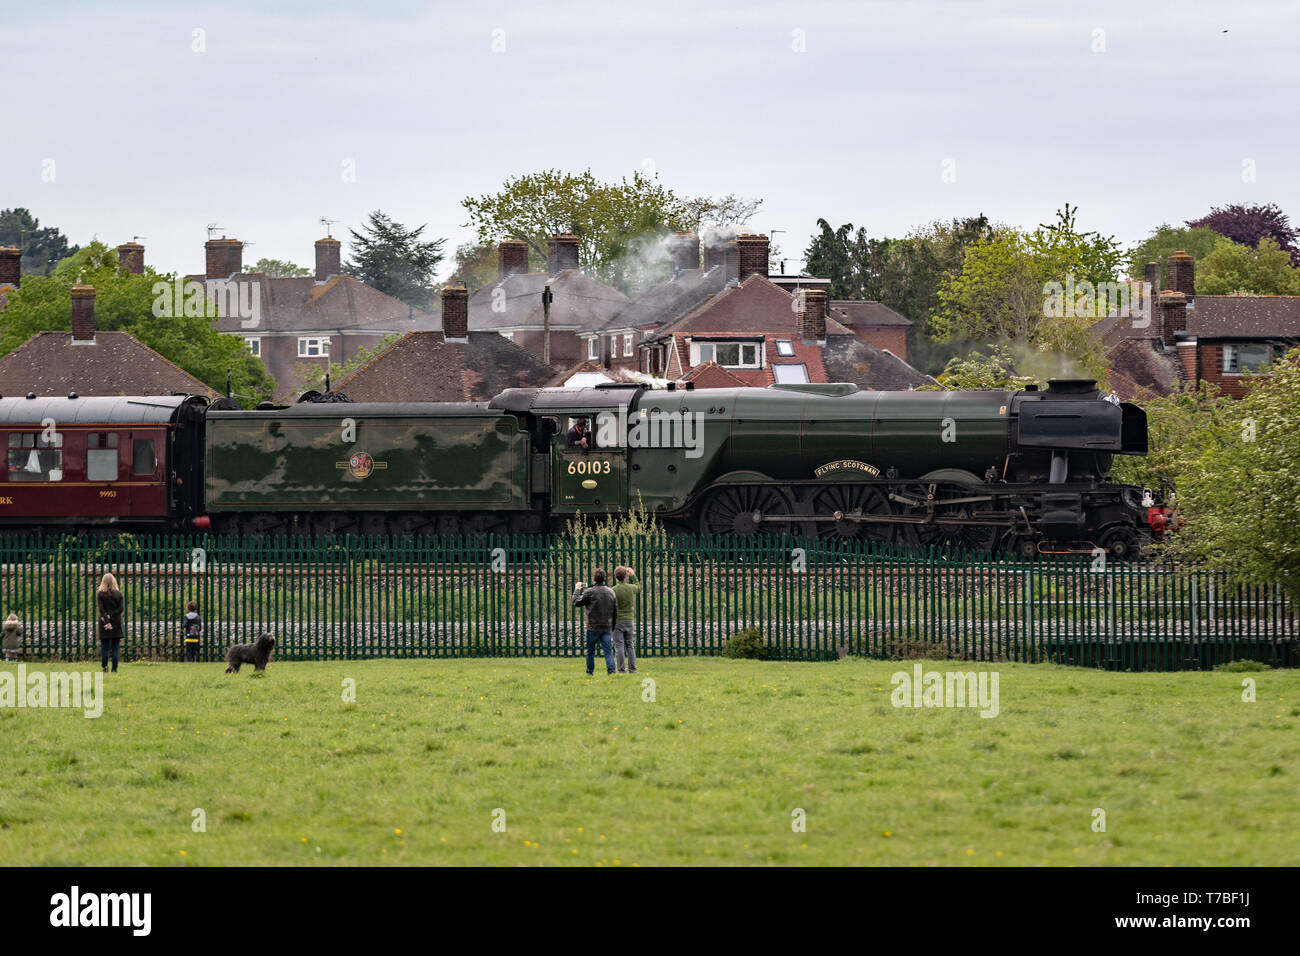 Oxford, Oxfordshire, UK. 5 May, 2019. The famous Flying Scotsman, Engine Number 60103, crosses alongside Port Meadow in Oxford Sunday evening. The train was delayed due to a broken rail and onlookers on the tracks. Credit: Sidney Bruere/Alamy Live News Stock Photo